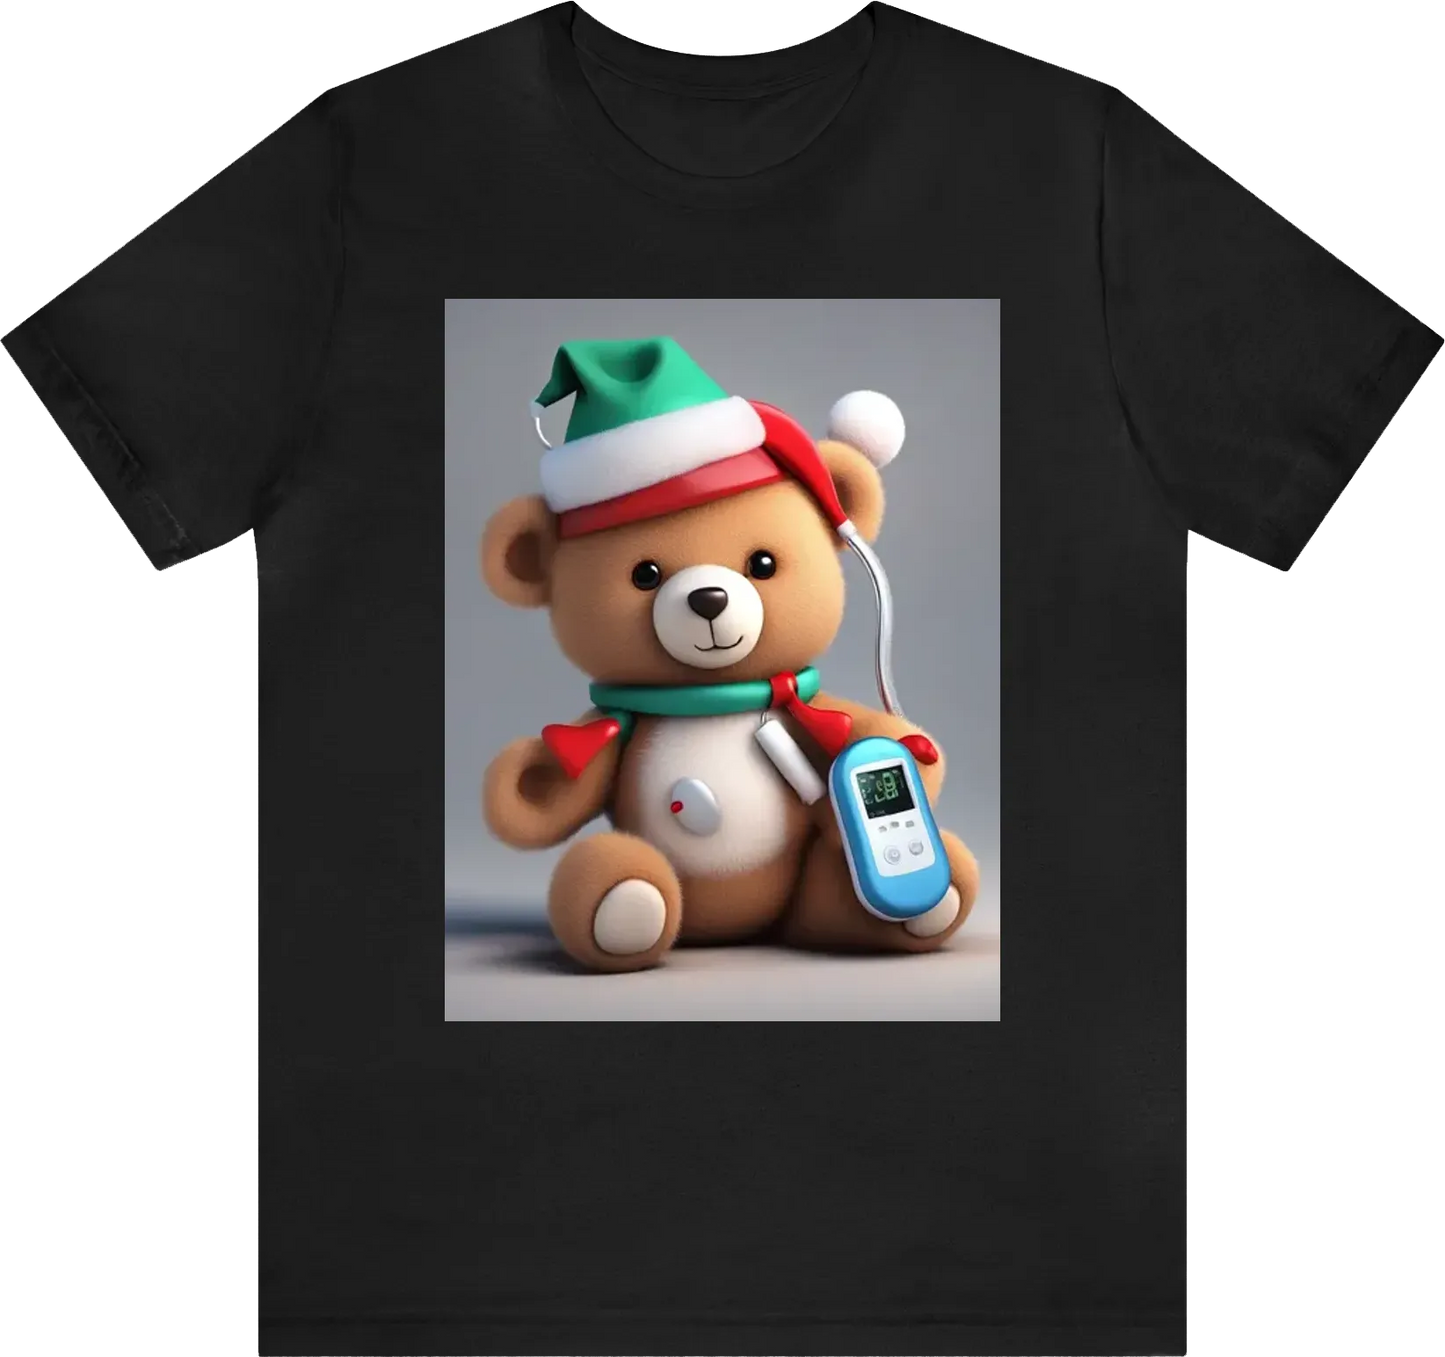 Cute 3d teddy bear wearing a christmas hat, and a glucose meter on its arm